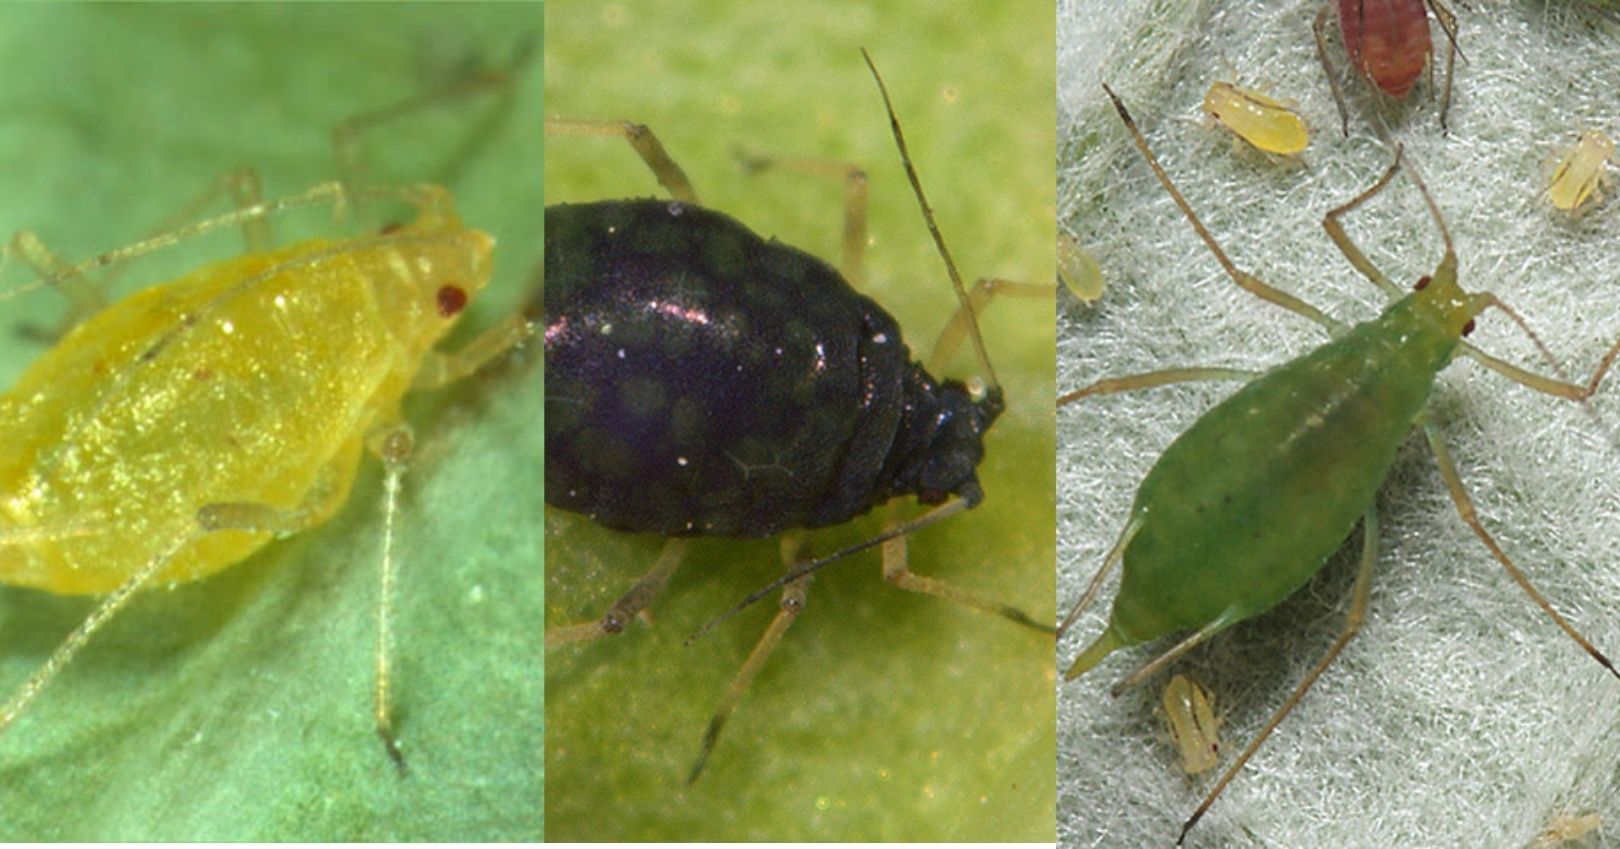 Green Peach Aphid, Melon Aphid, and Potato Aphid (influentialpoints.com)